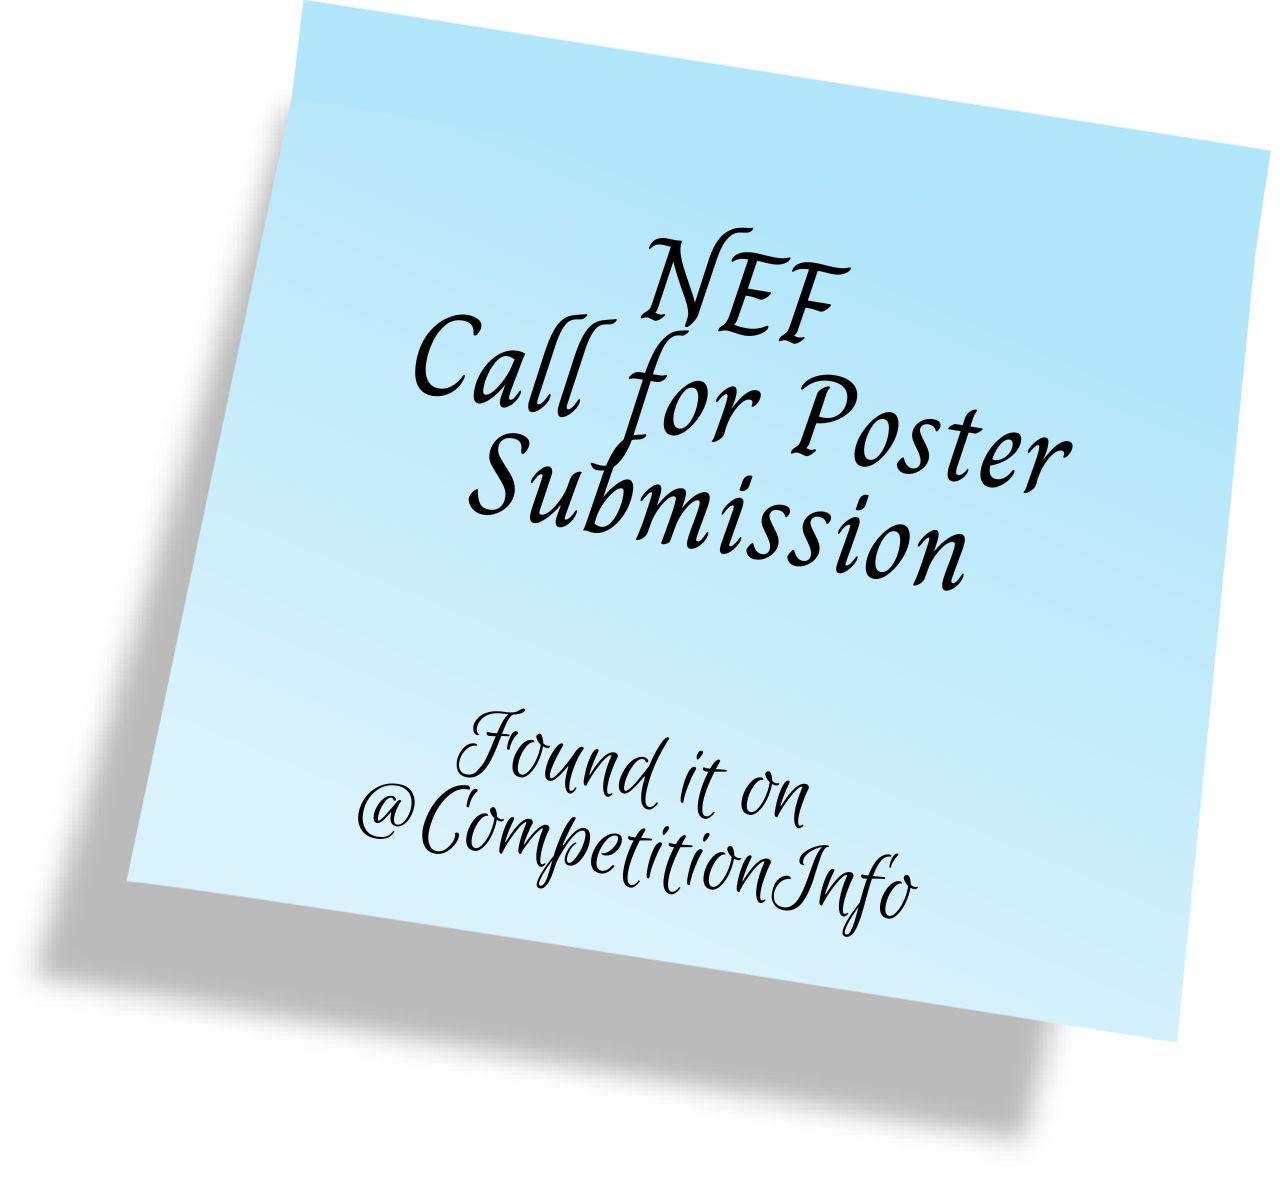 NEF Call for Poster Submission